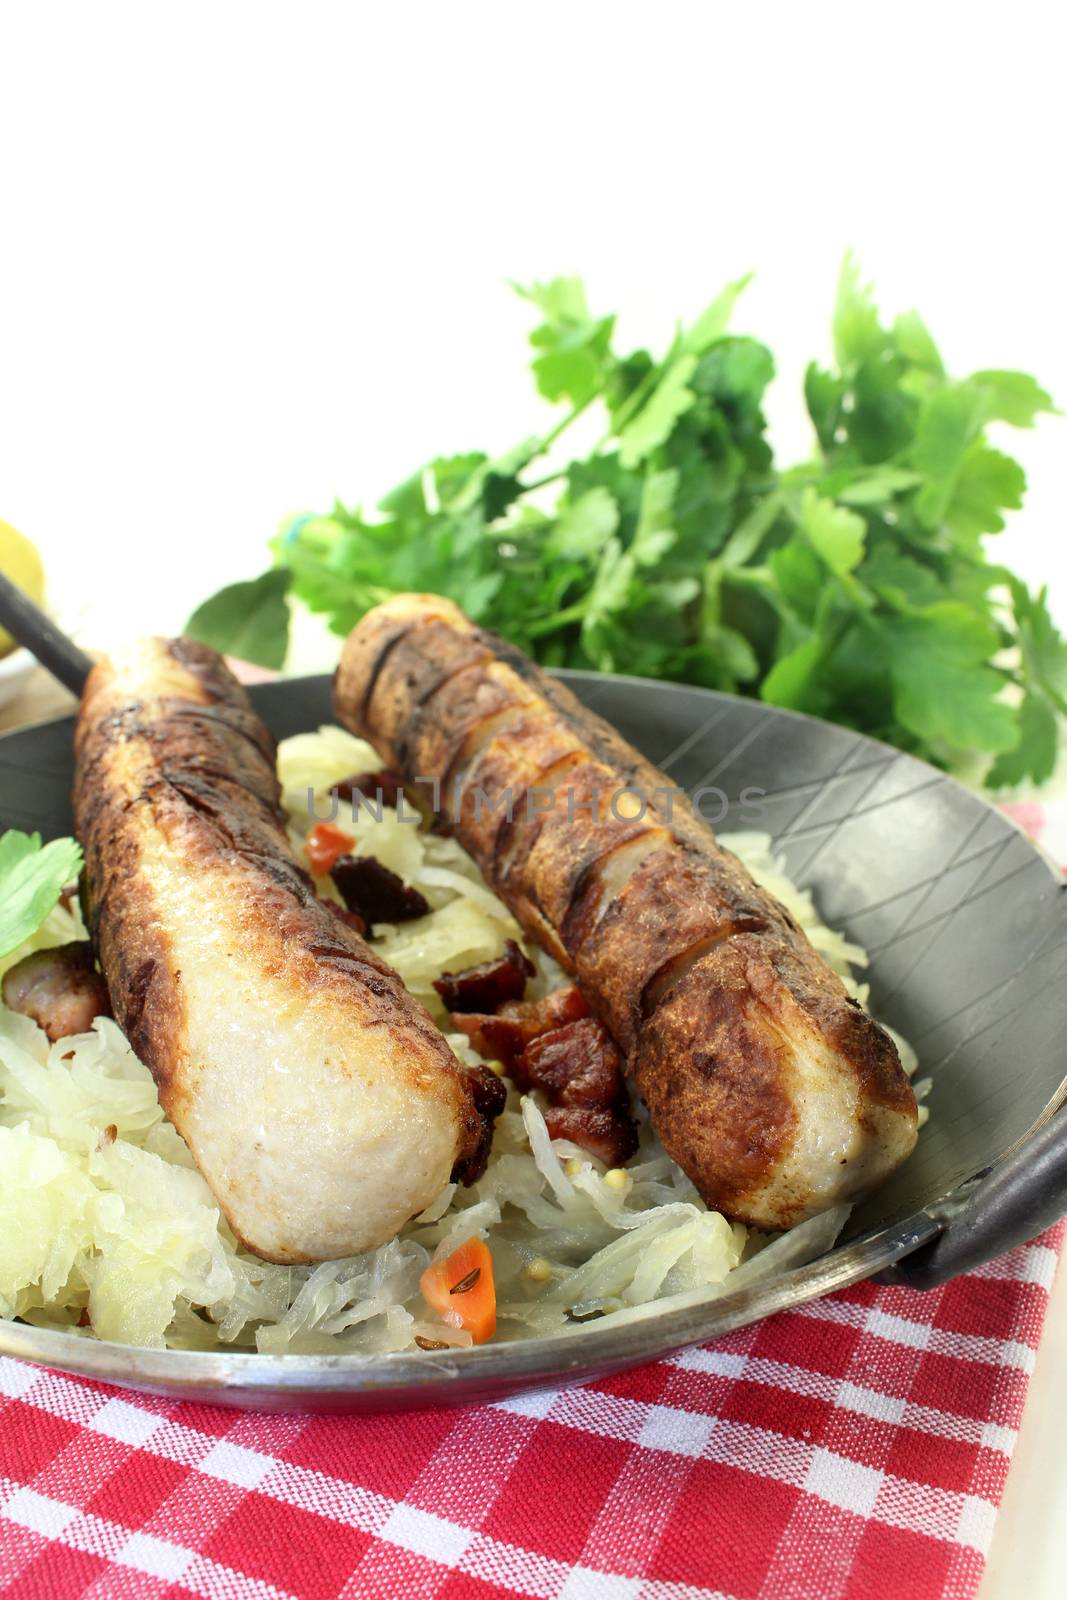 a pan with sourcrout and fried sausage